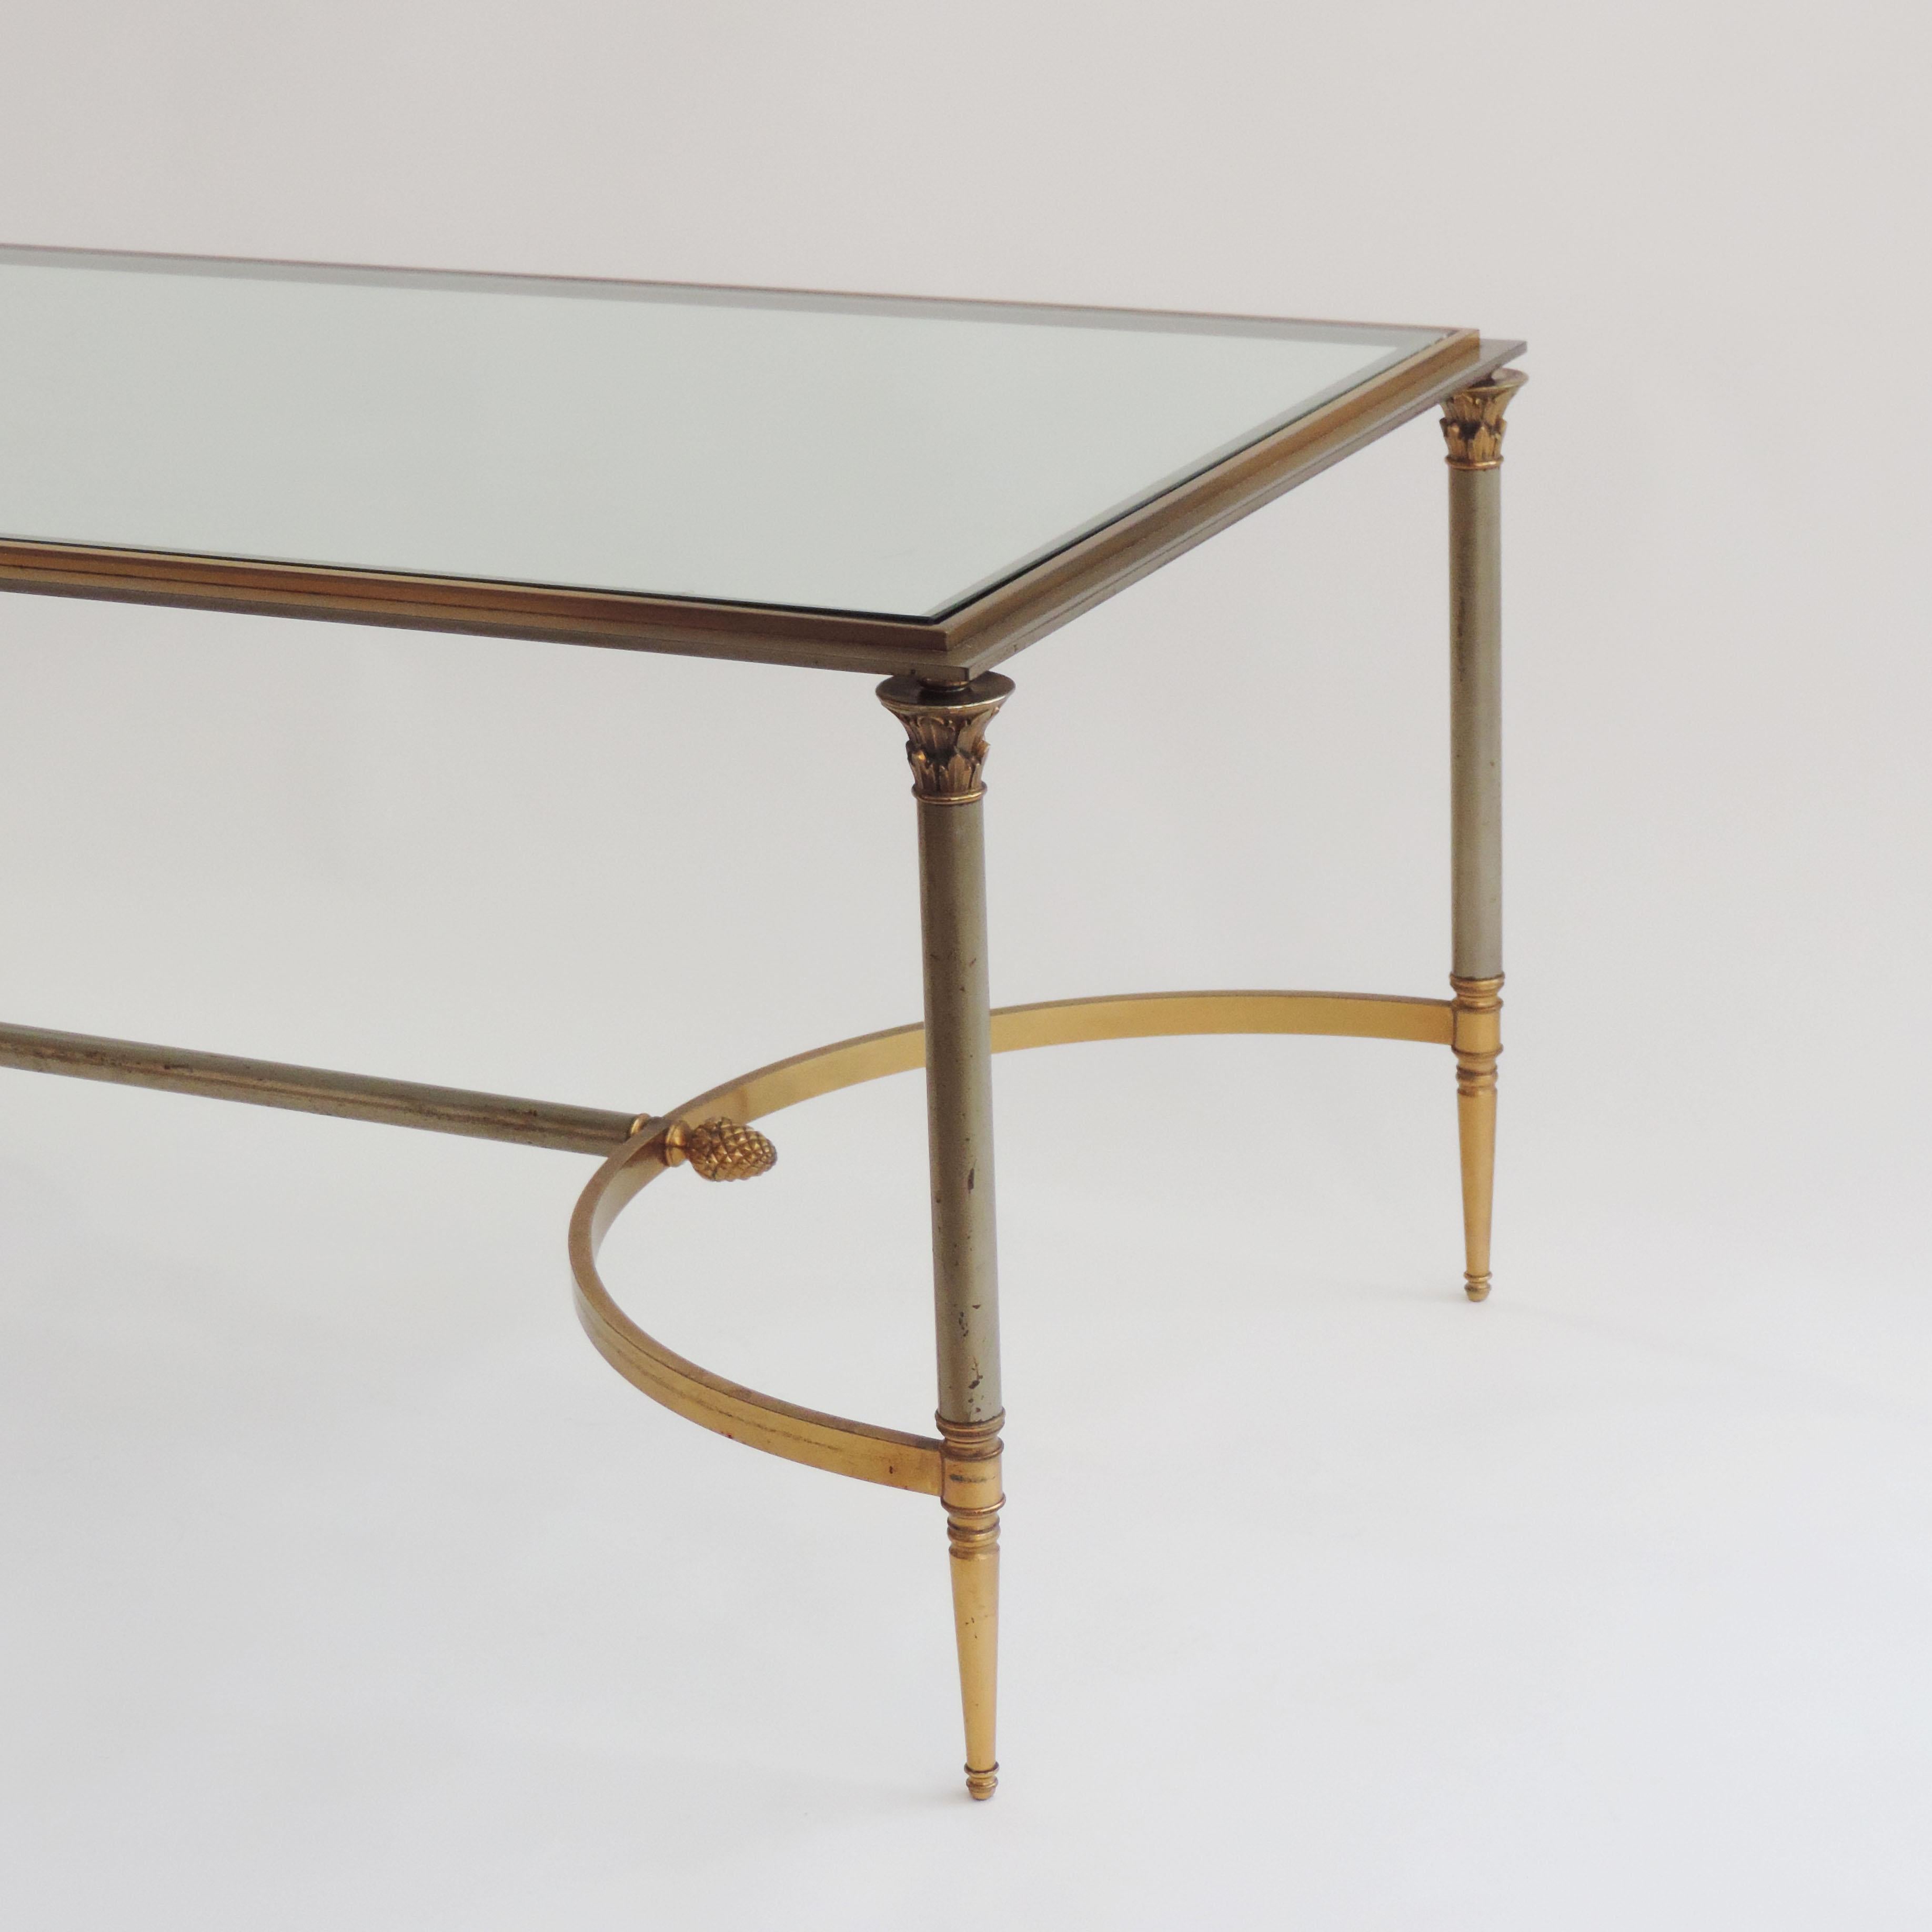 Neoclassical Revival French 1970s Neo-Classical Steel and Brass Coffee Table